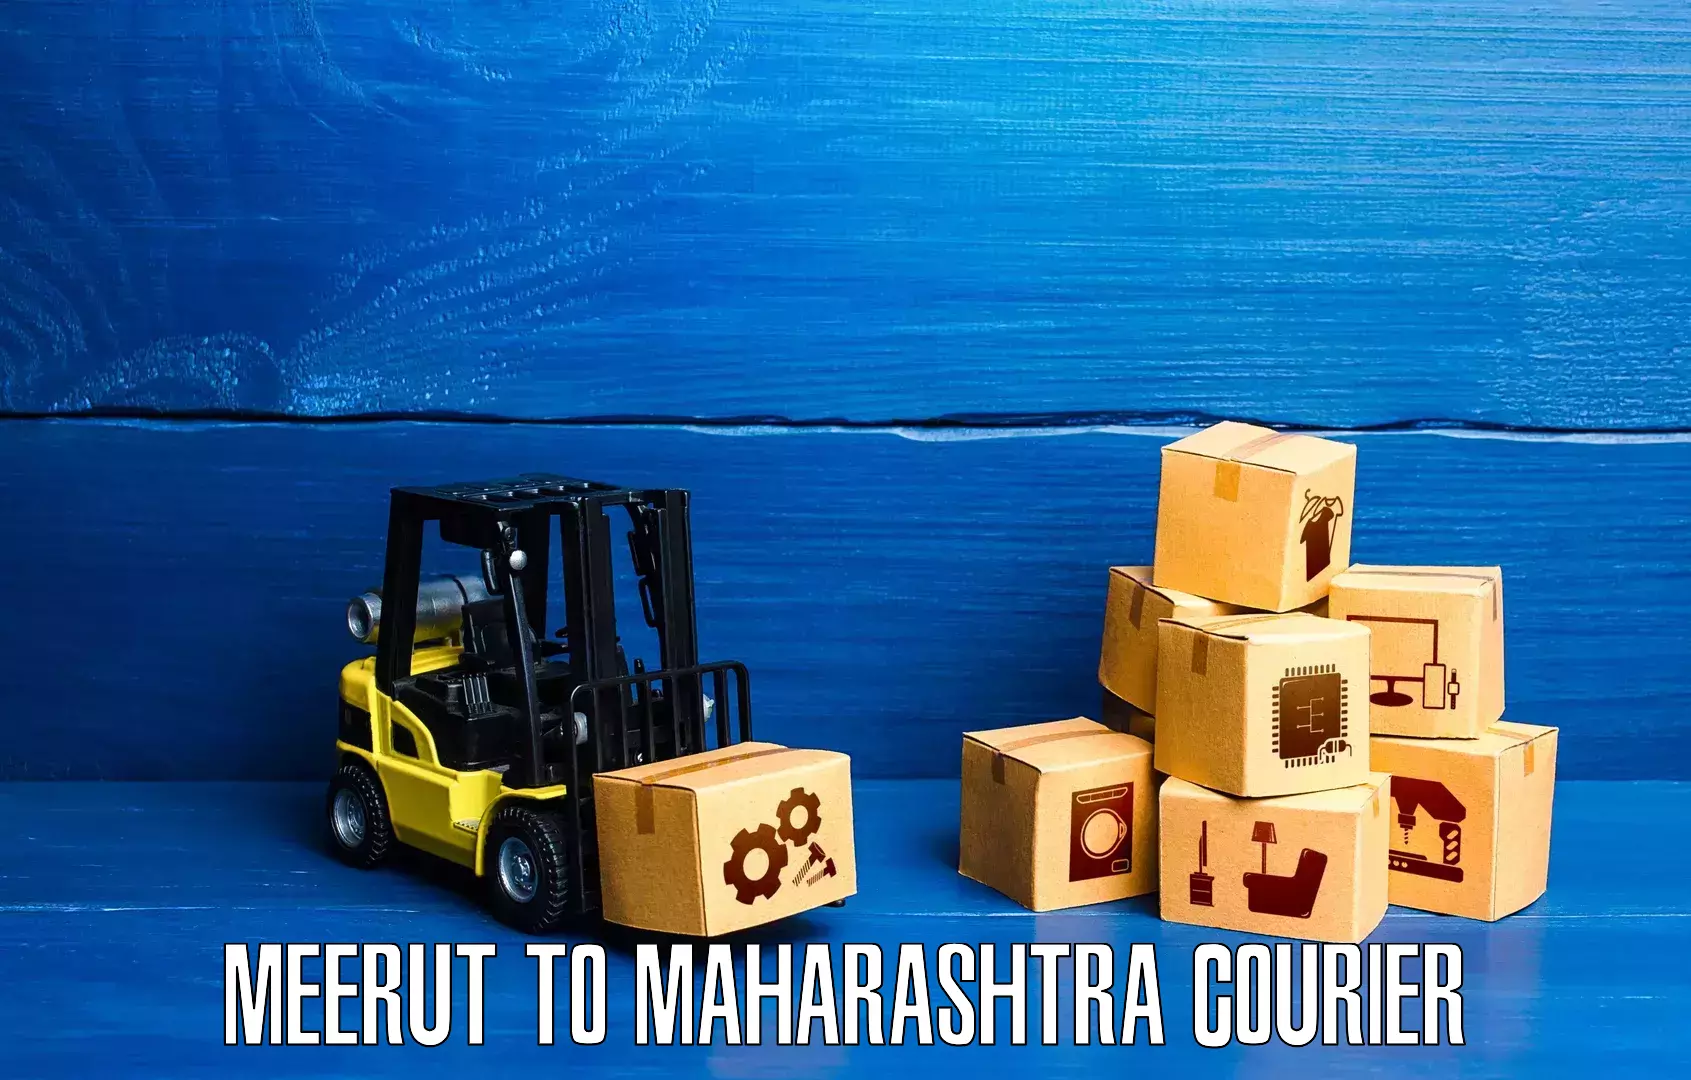 State-of-the-art courier technology Meerut to Shirur Anantpal